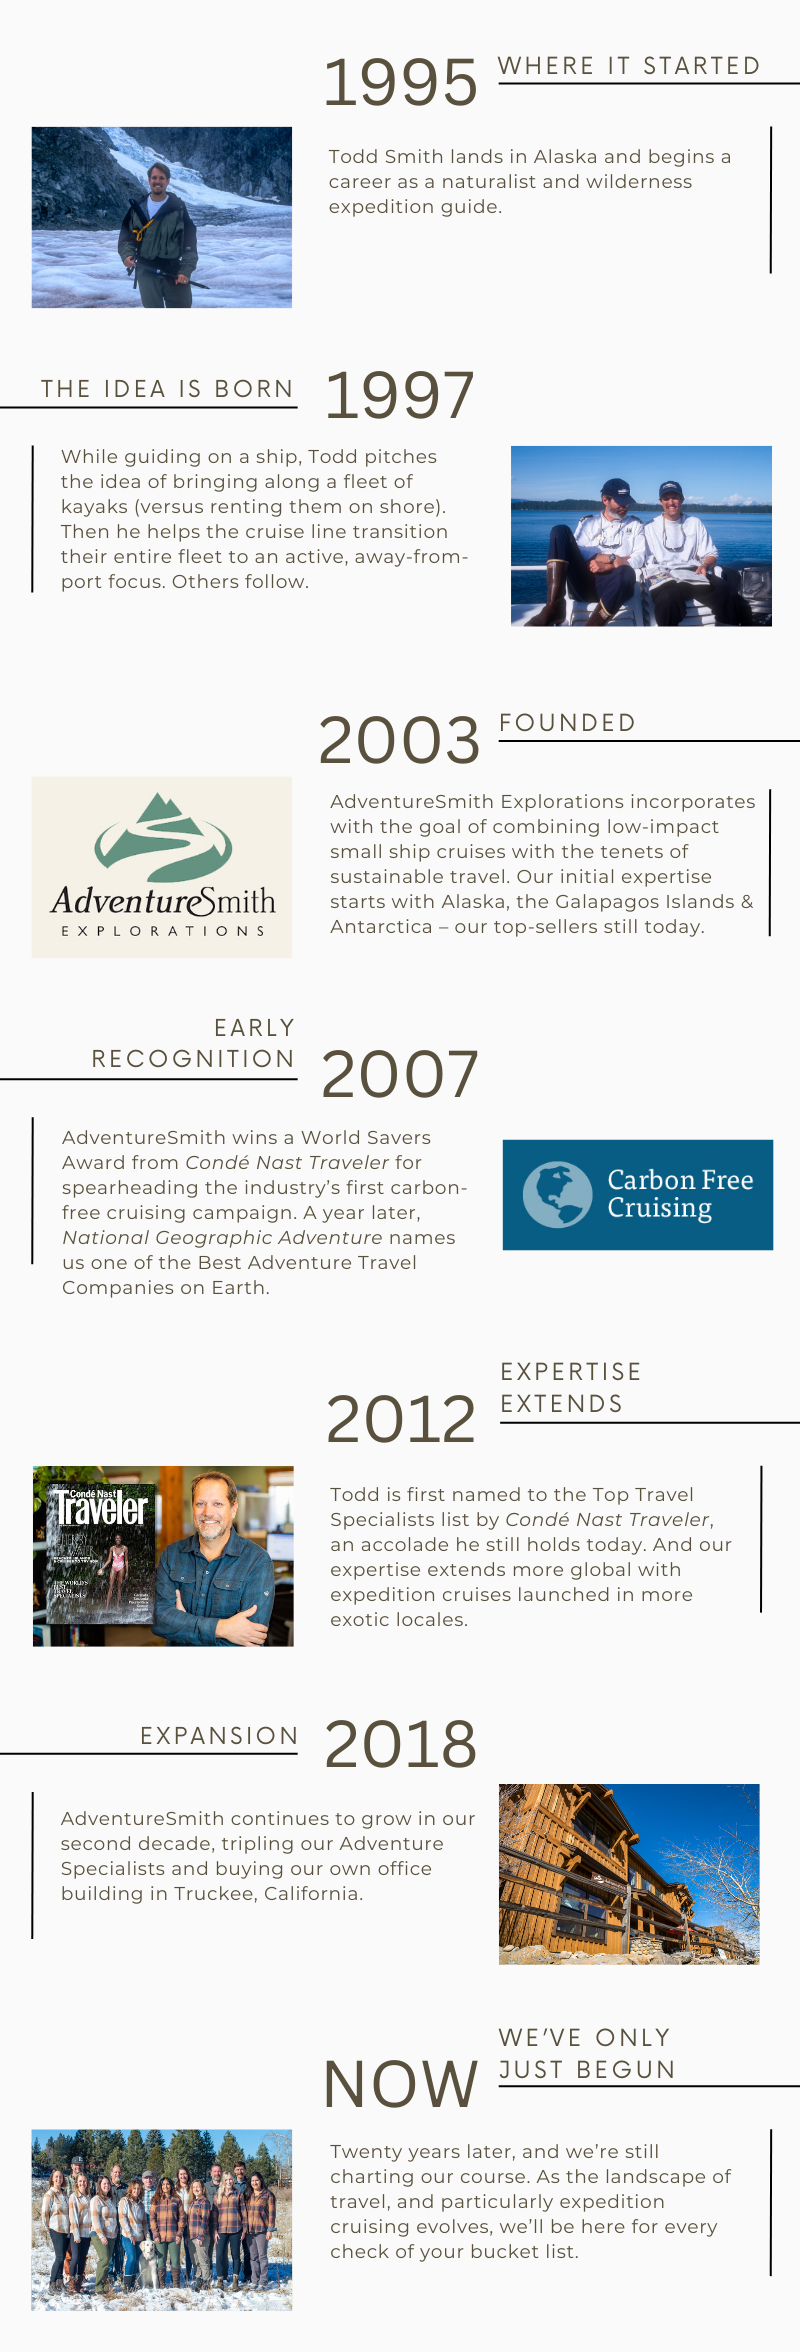 Infographic with images and text depicting the company timeline of AdventureSmith Explorations and Todd Smith's story